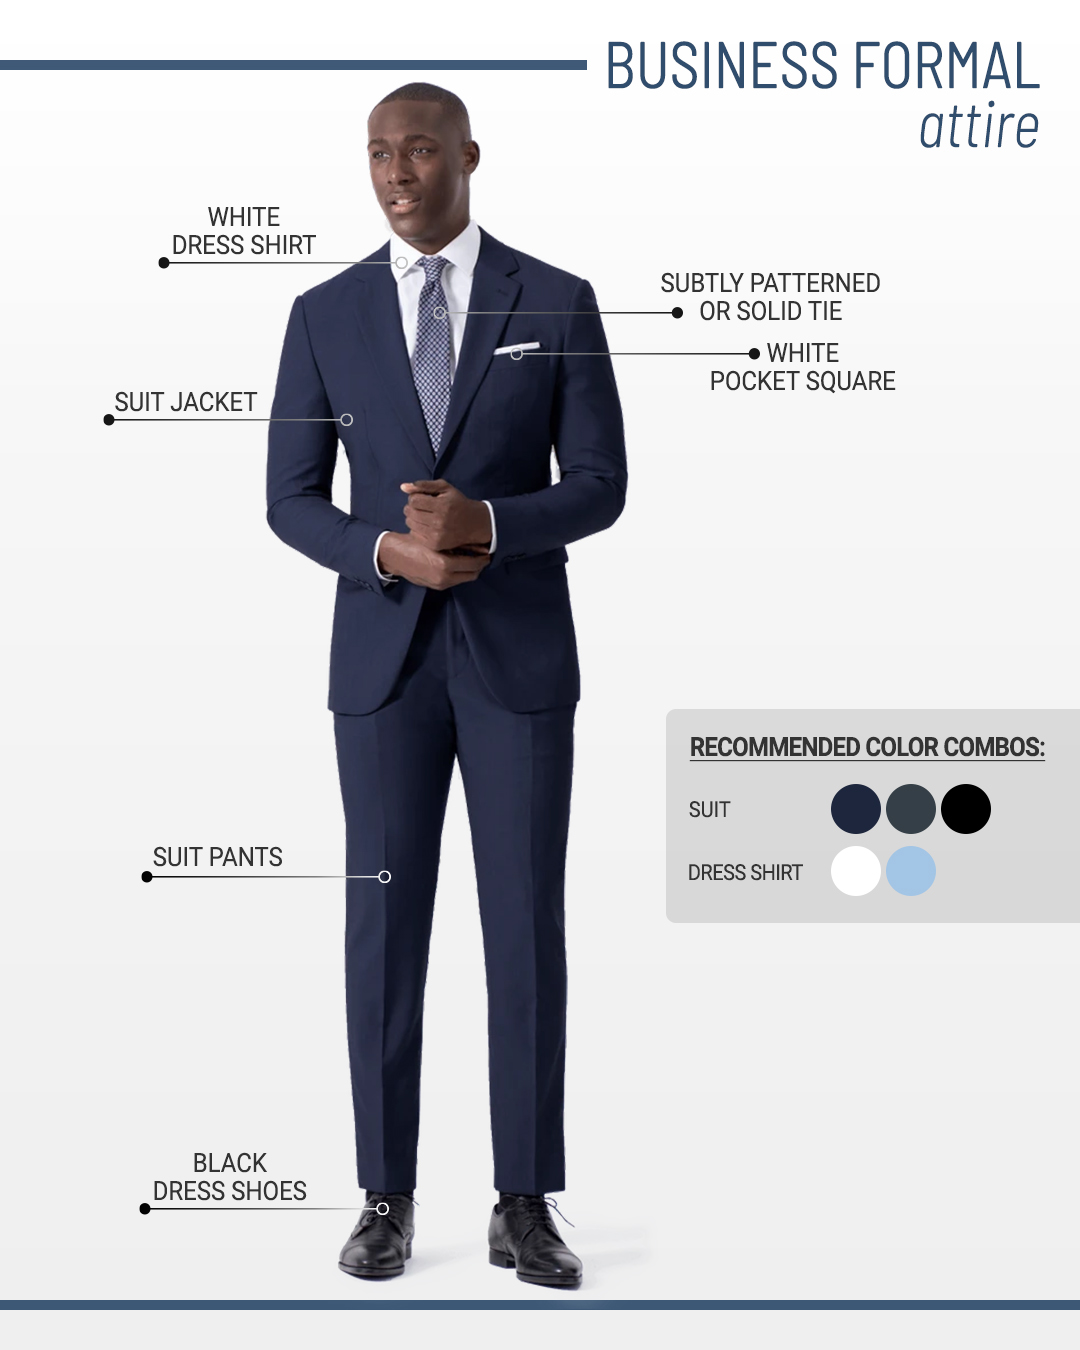 Business formal dress code and attire for men